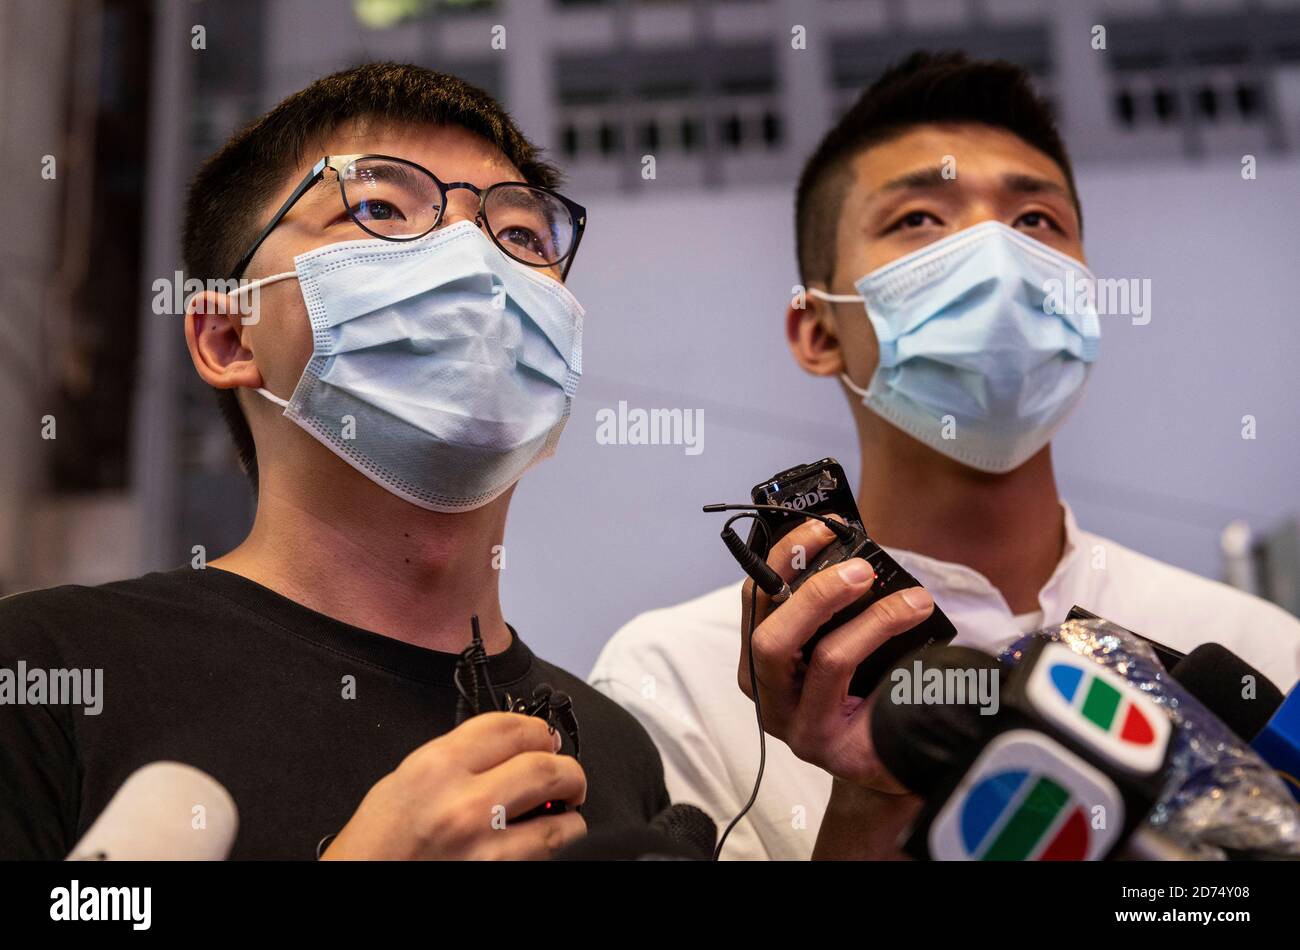 Pro-democracy activists Joshua Wong (L) and Owen Chow (R) speak to the press during the rally.Pro democracy activates rally in Hong Kong in support of the 12 Hongkongers detained in Mainland China after allegedly trying to flee to Taiwan to claim political asylum in August 2020. The 12 detainees has committed different political crimes in Hong Kong and were on court bail when they fled. Stock Photo